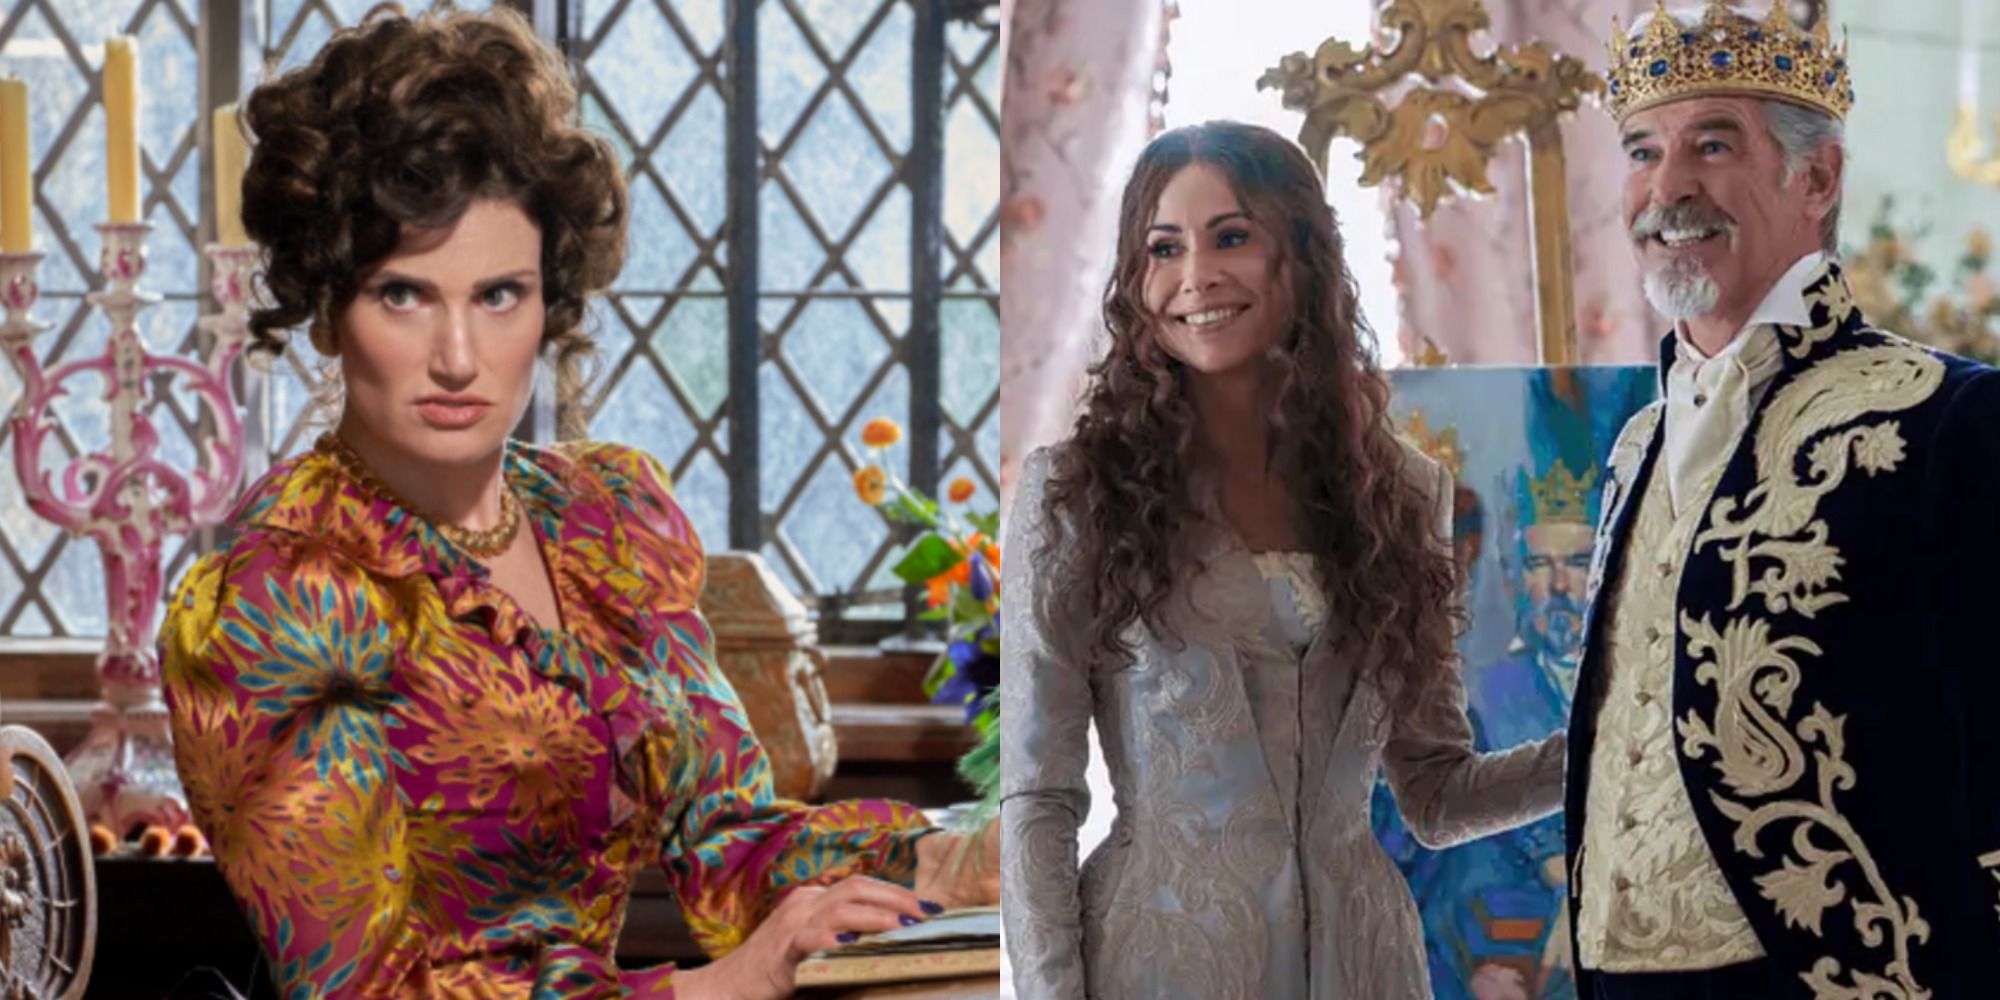 A split image of Vivian sitting down and King Rowan and Queen Beatrice in Cinderella 2021